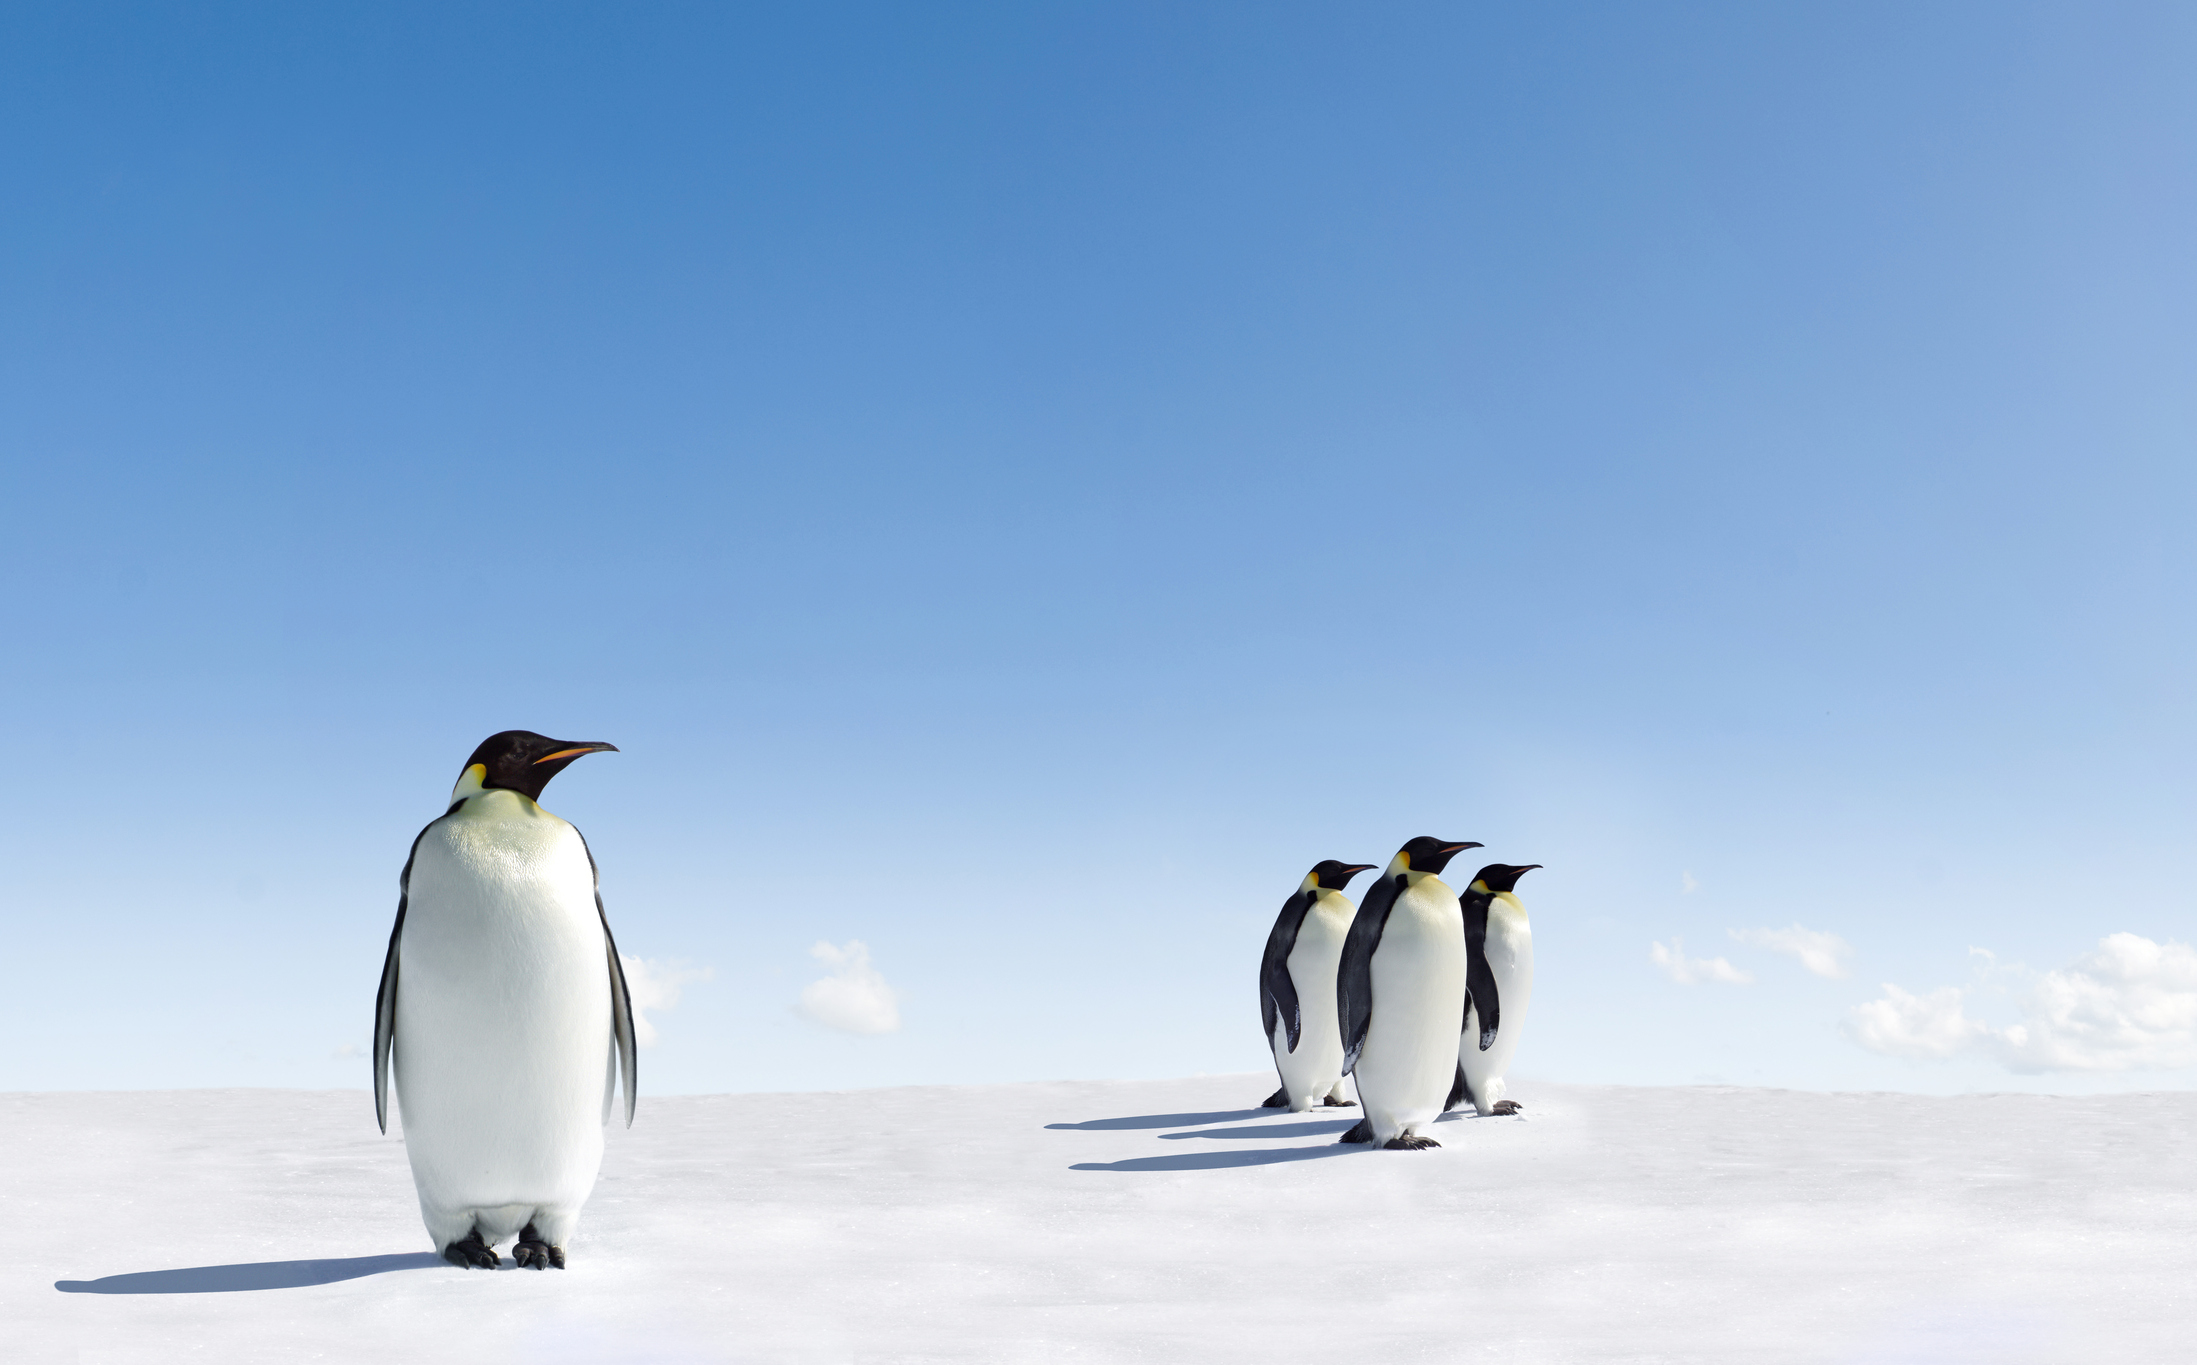 Four Emperor Penguins standing on ice with one alone outside the group